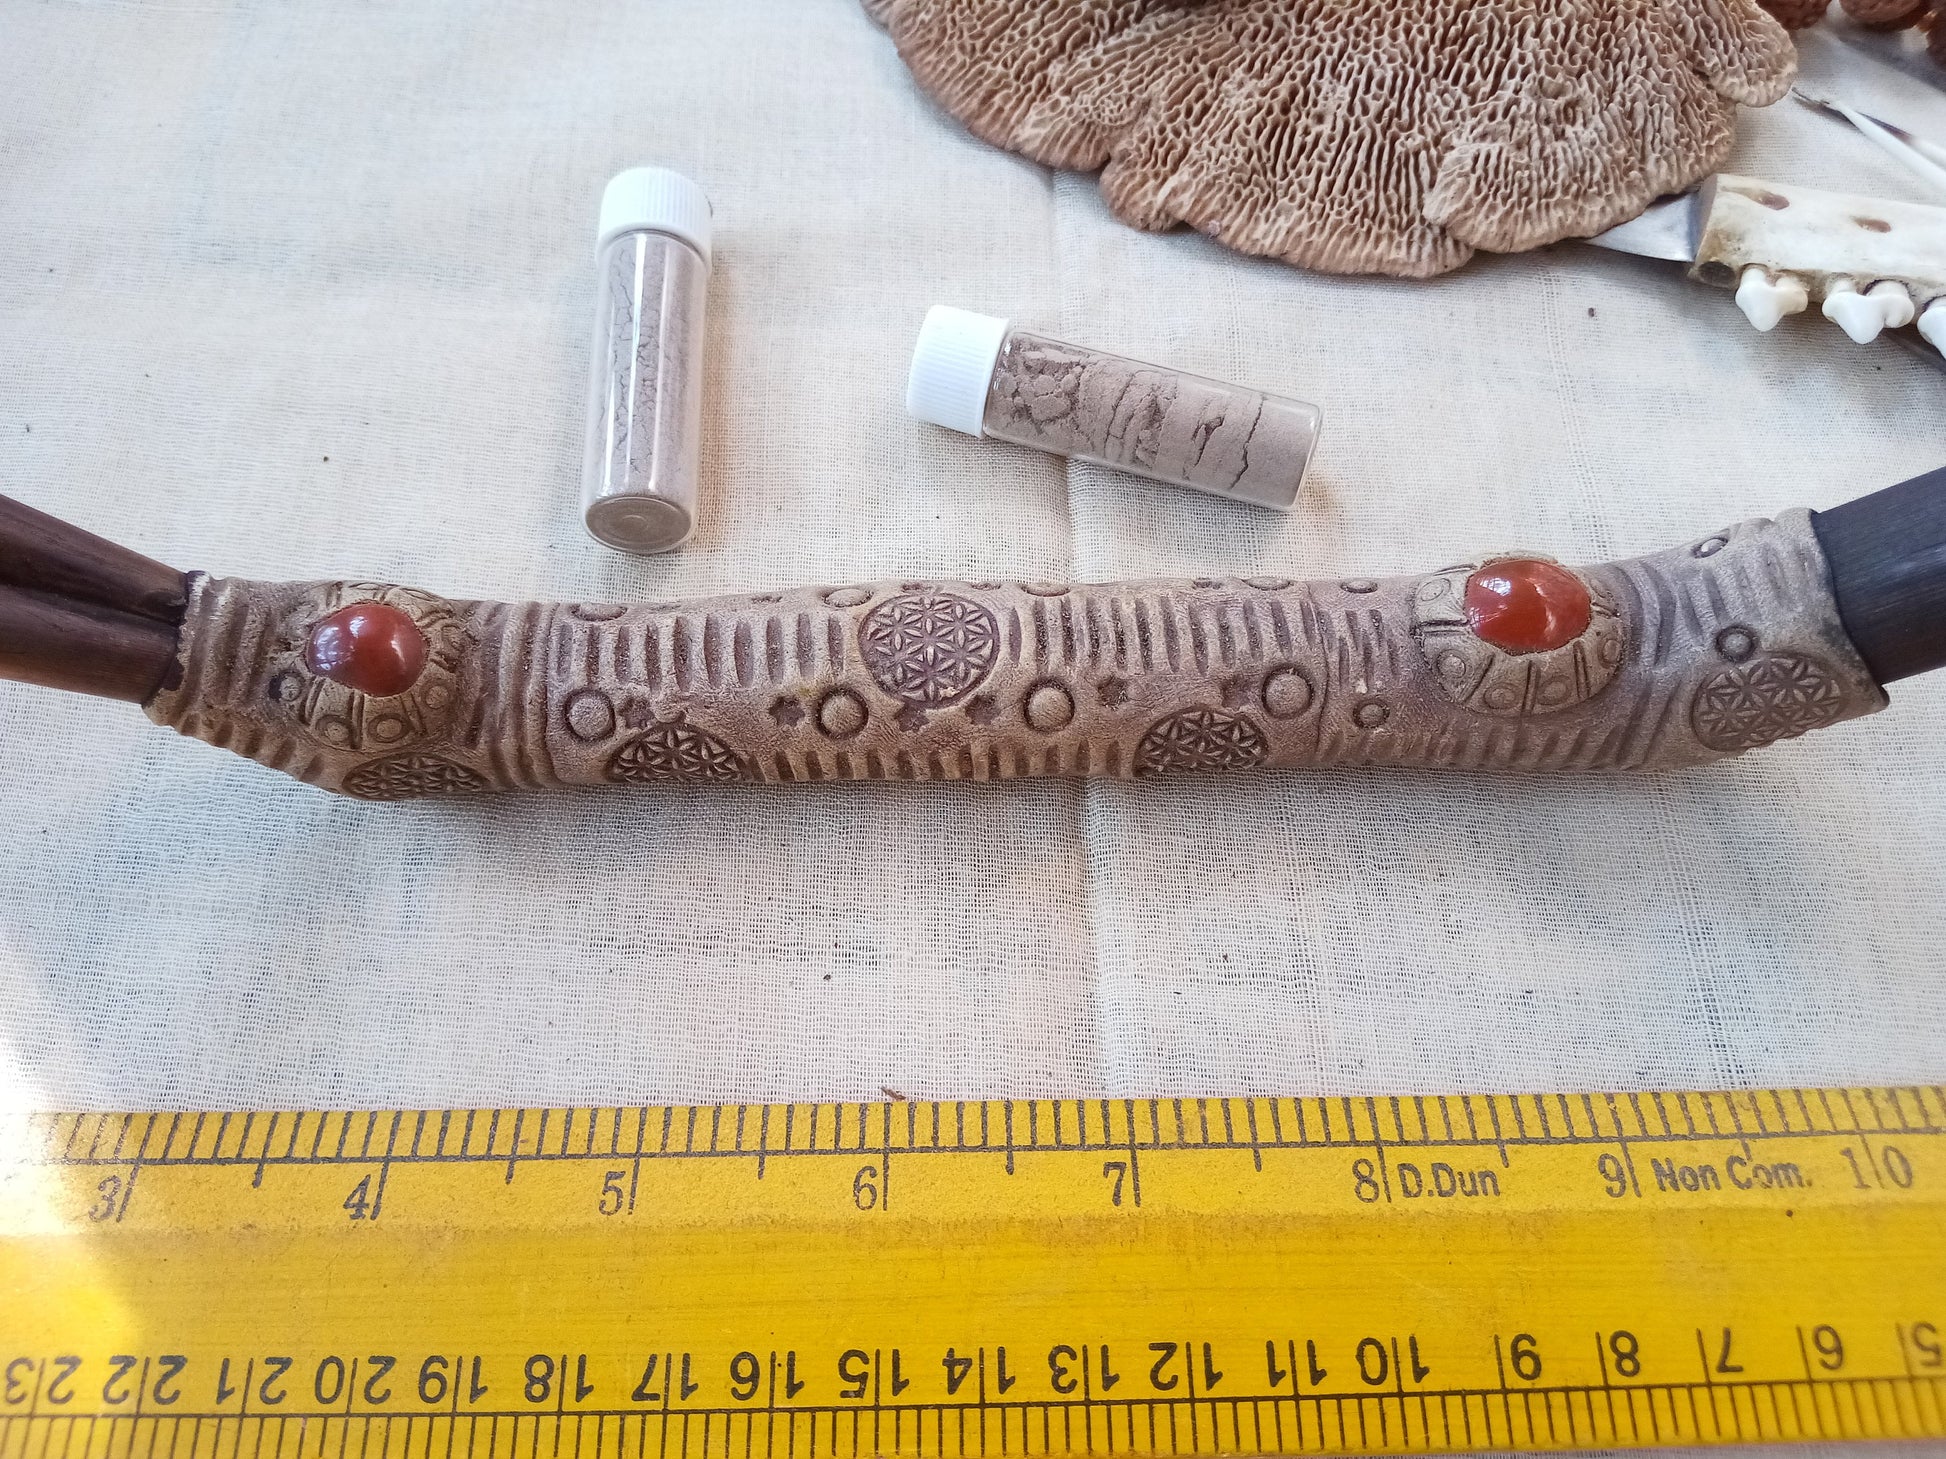 Double Tepi Rapè applicator - Traditionally used in Ayahuasca or Kambo ceremonies - handmade bamboo pipe with red jasper gem crystal